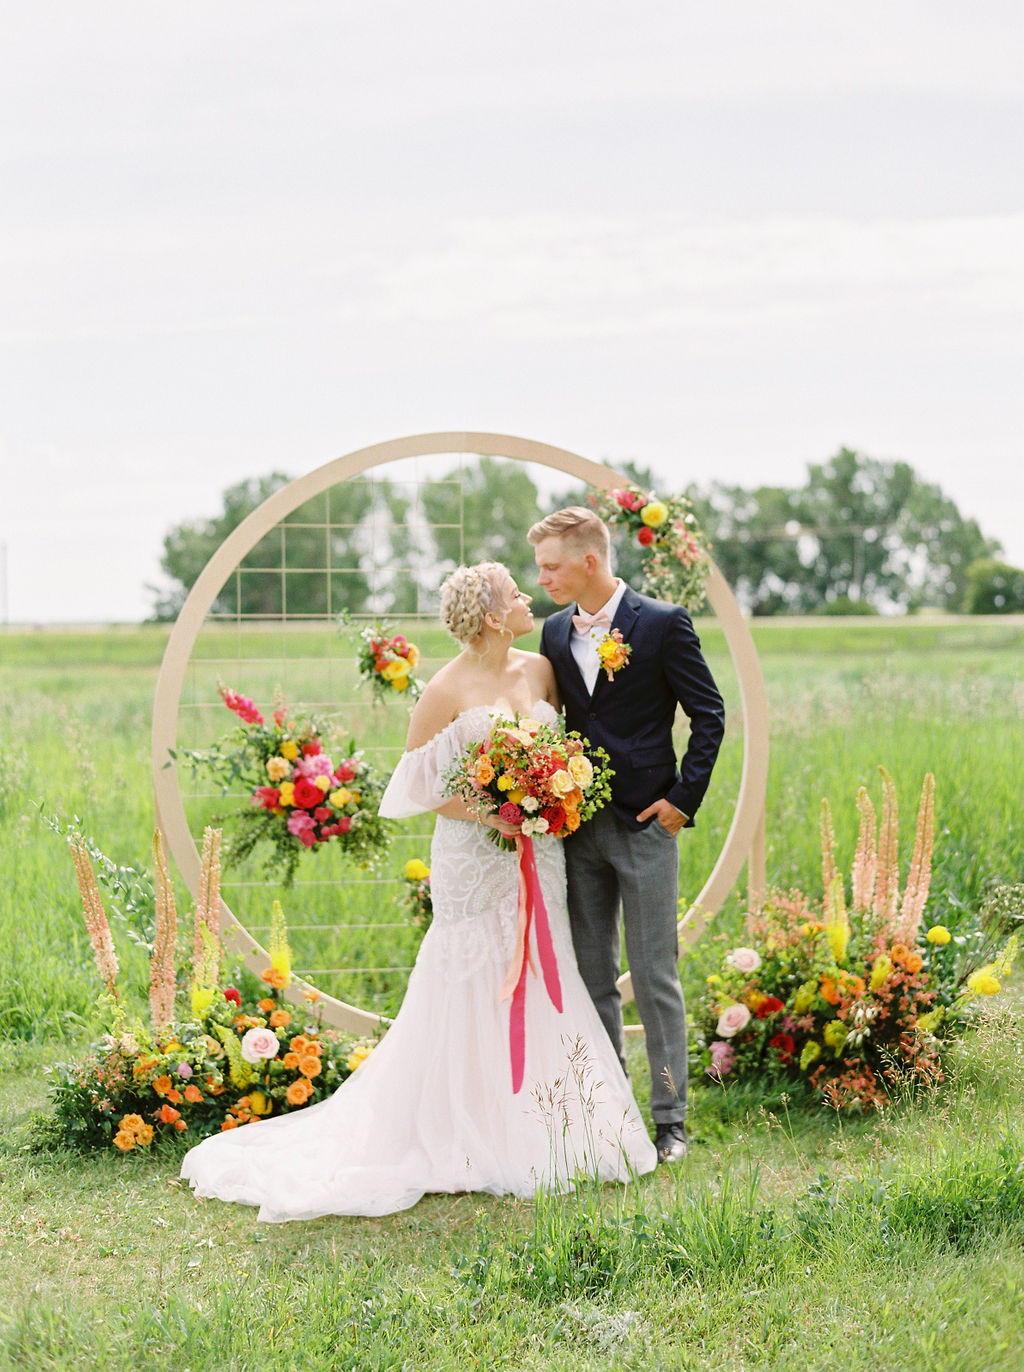 bold floral bouquet with reds, yellows and oranges make the spring colors pop with warmth and boldness for this couples spring wedding